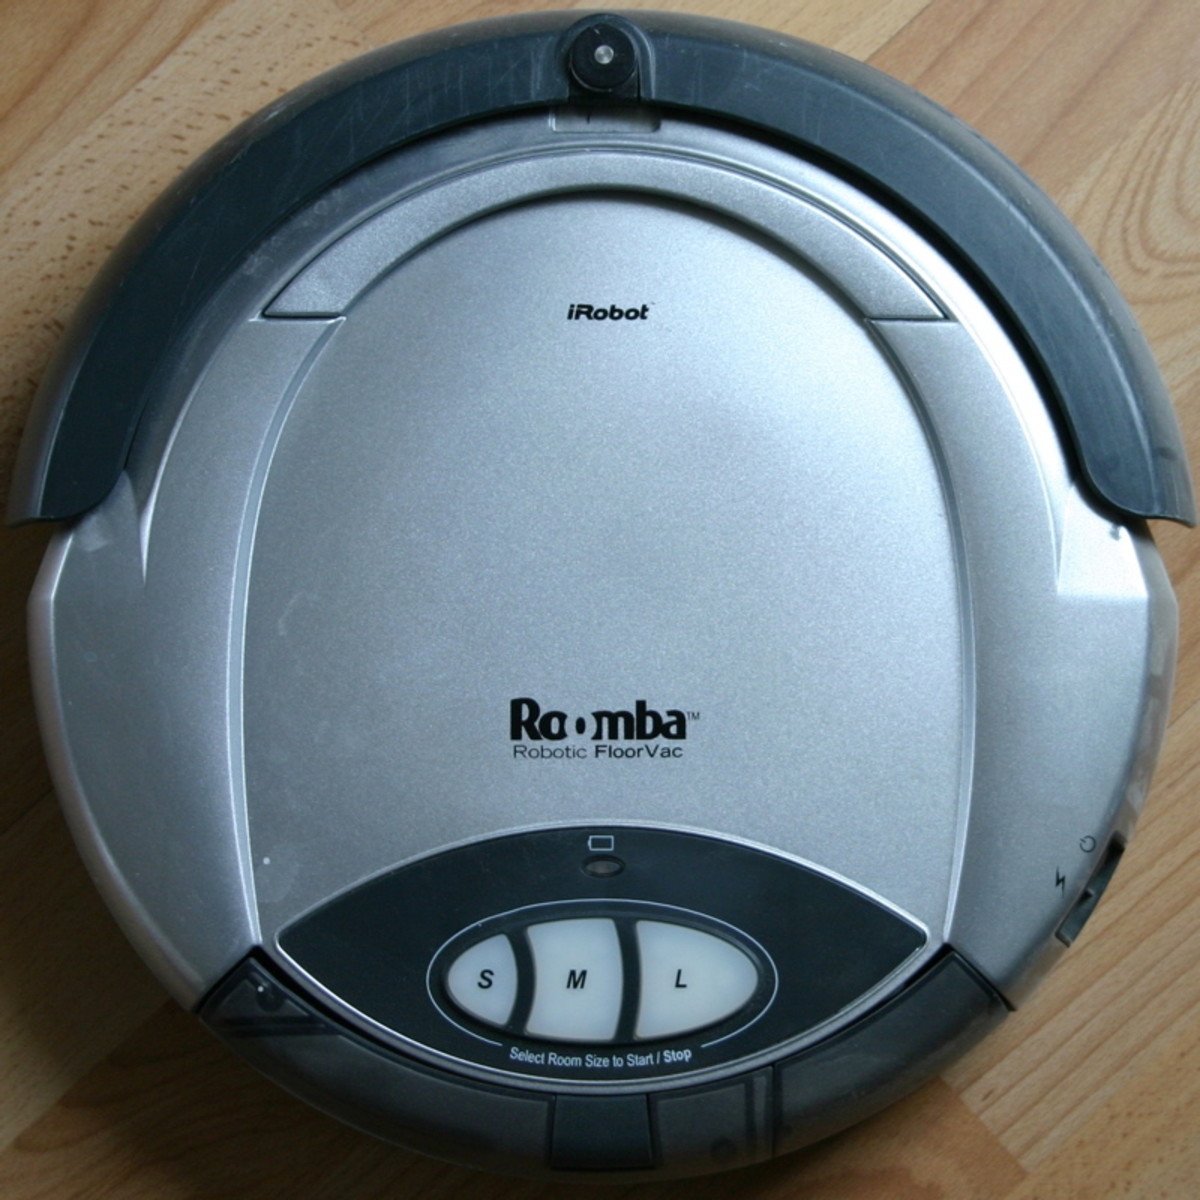 This article will show you how to get the bin full light on your Roomba to turn off—by cleaning your bin sensor.